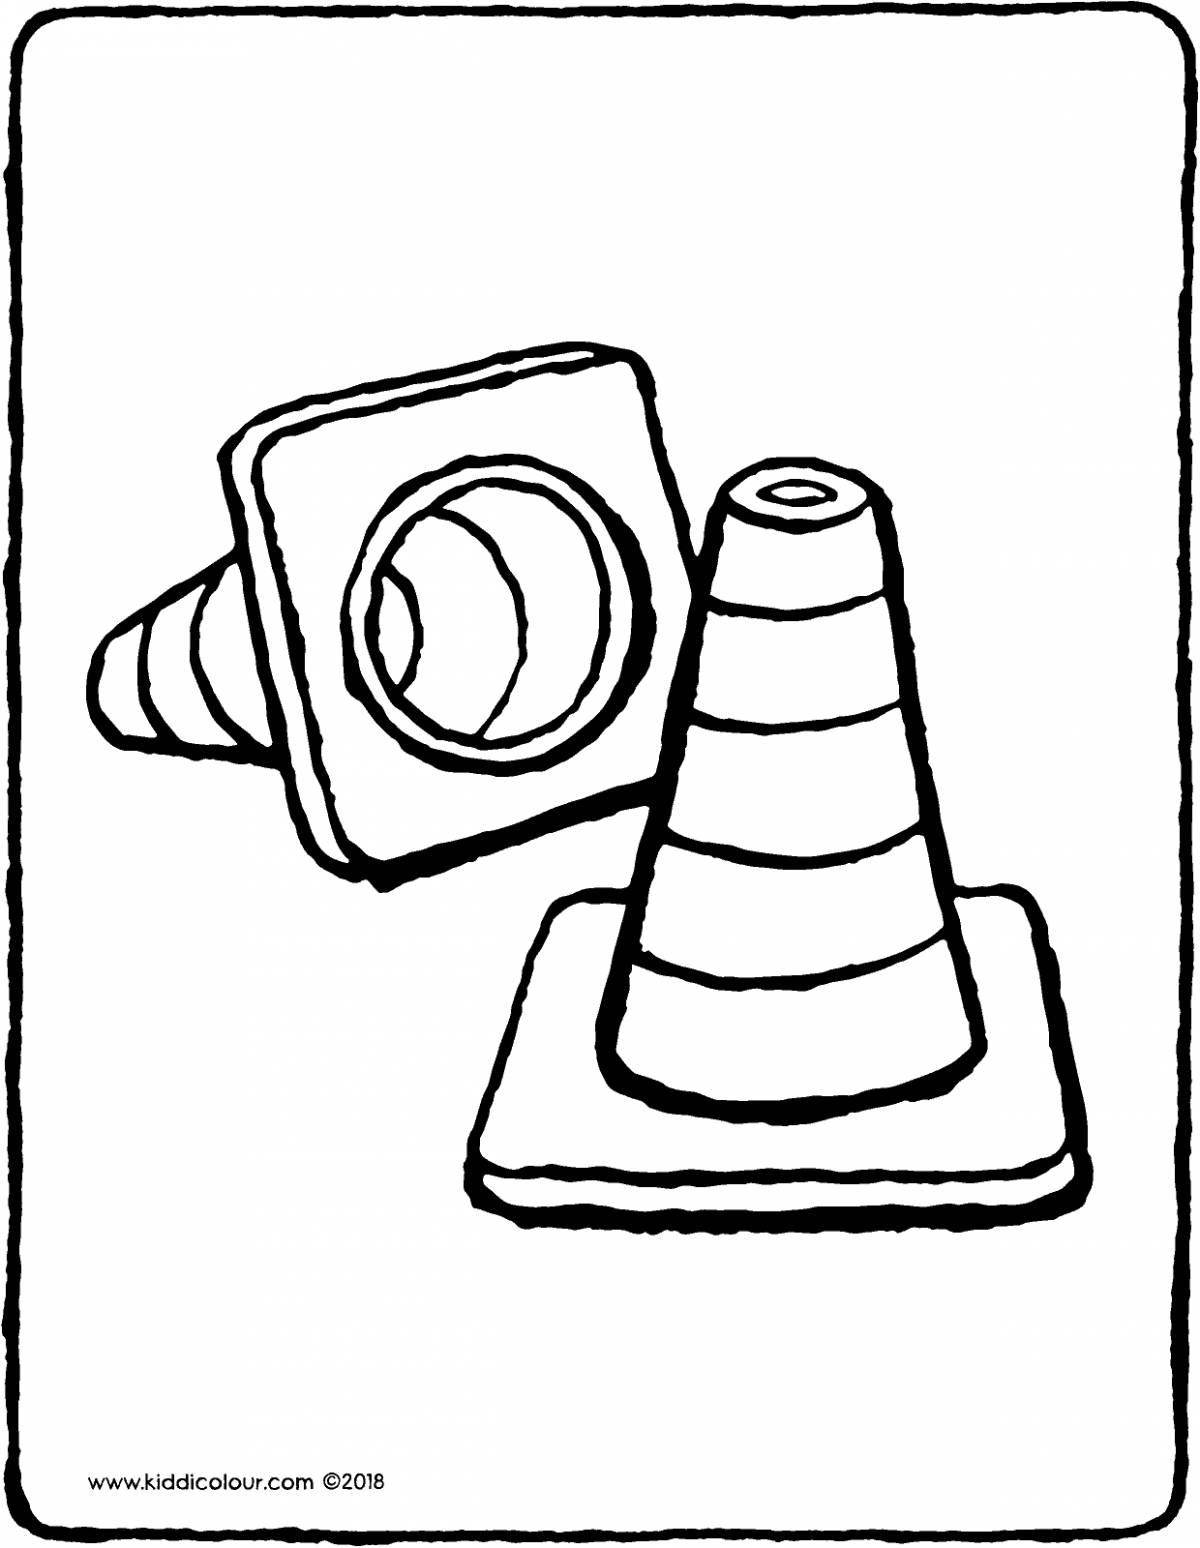 Luminous traffic cone coloring pages